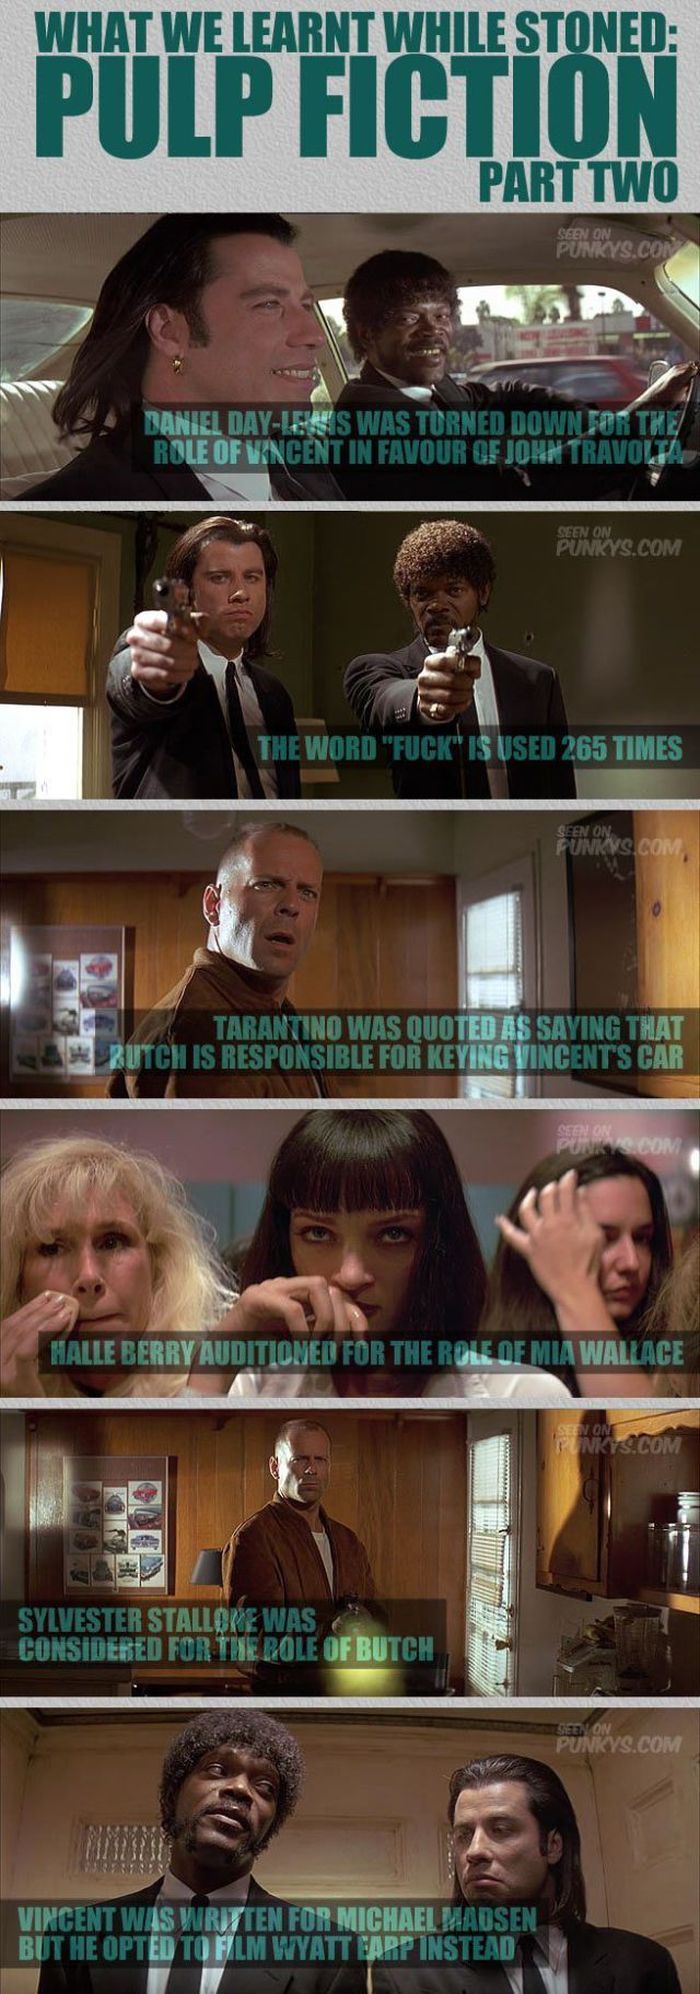 Interesting Facts About Pulp Fiction